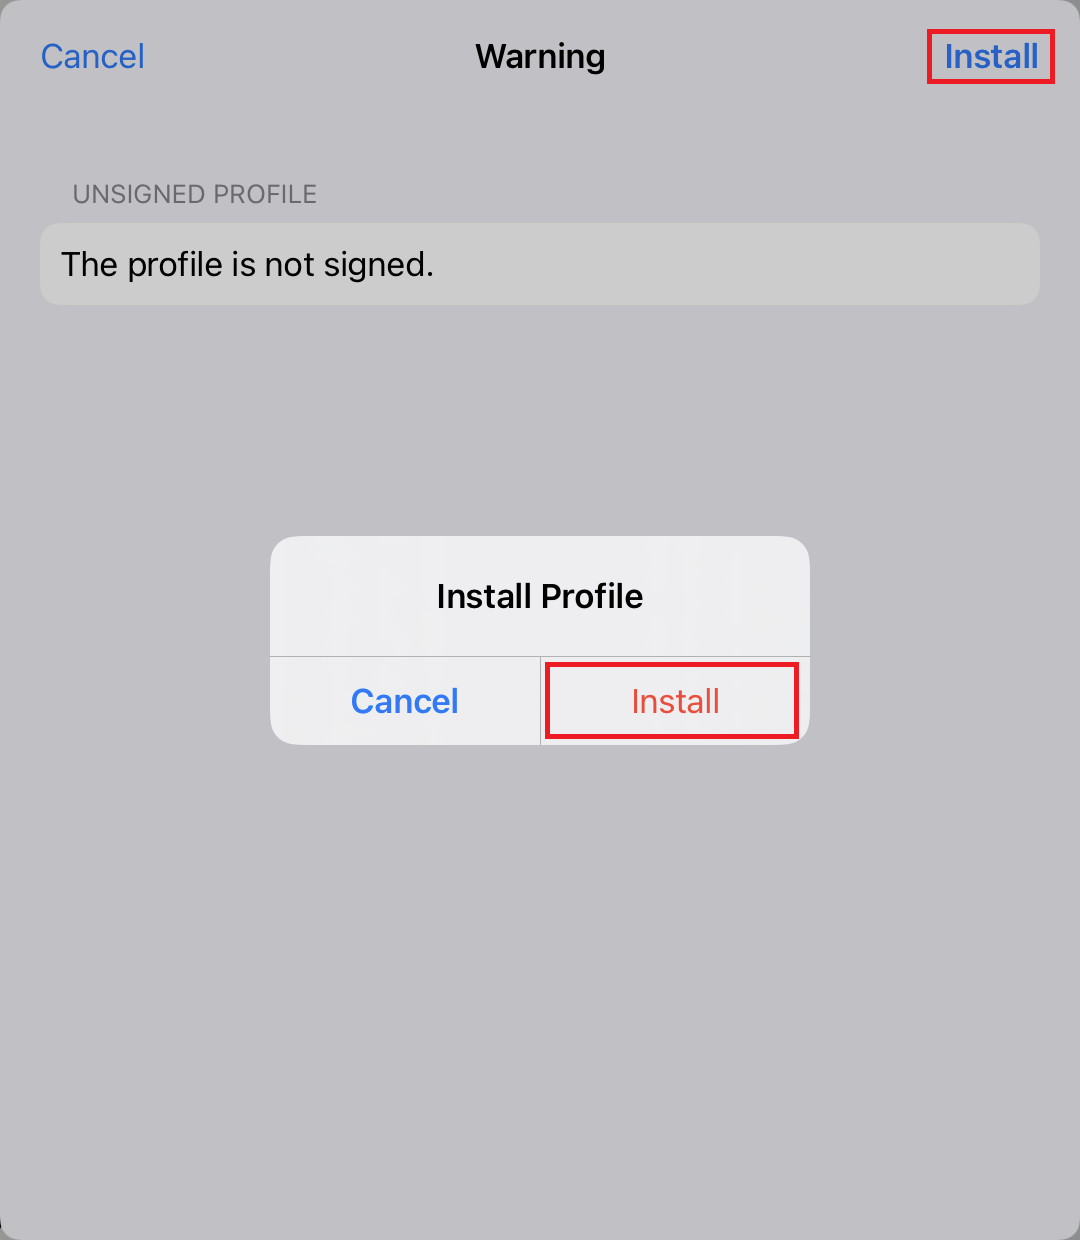 Dimmed window Warning, left marked clickable Cancel, right marked clickable Install. UNSIGNED PROFILE. The profile is not signed. Overlaid by the small window, Install Profil, Clickable Cancel, marked clickable Install.